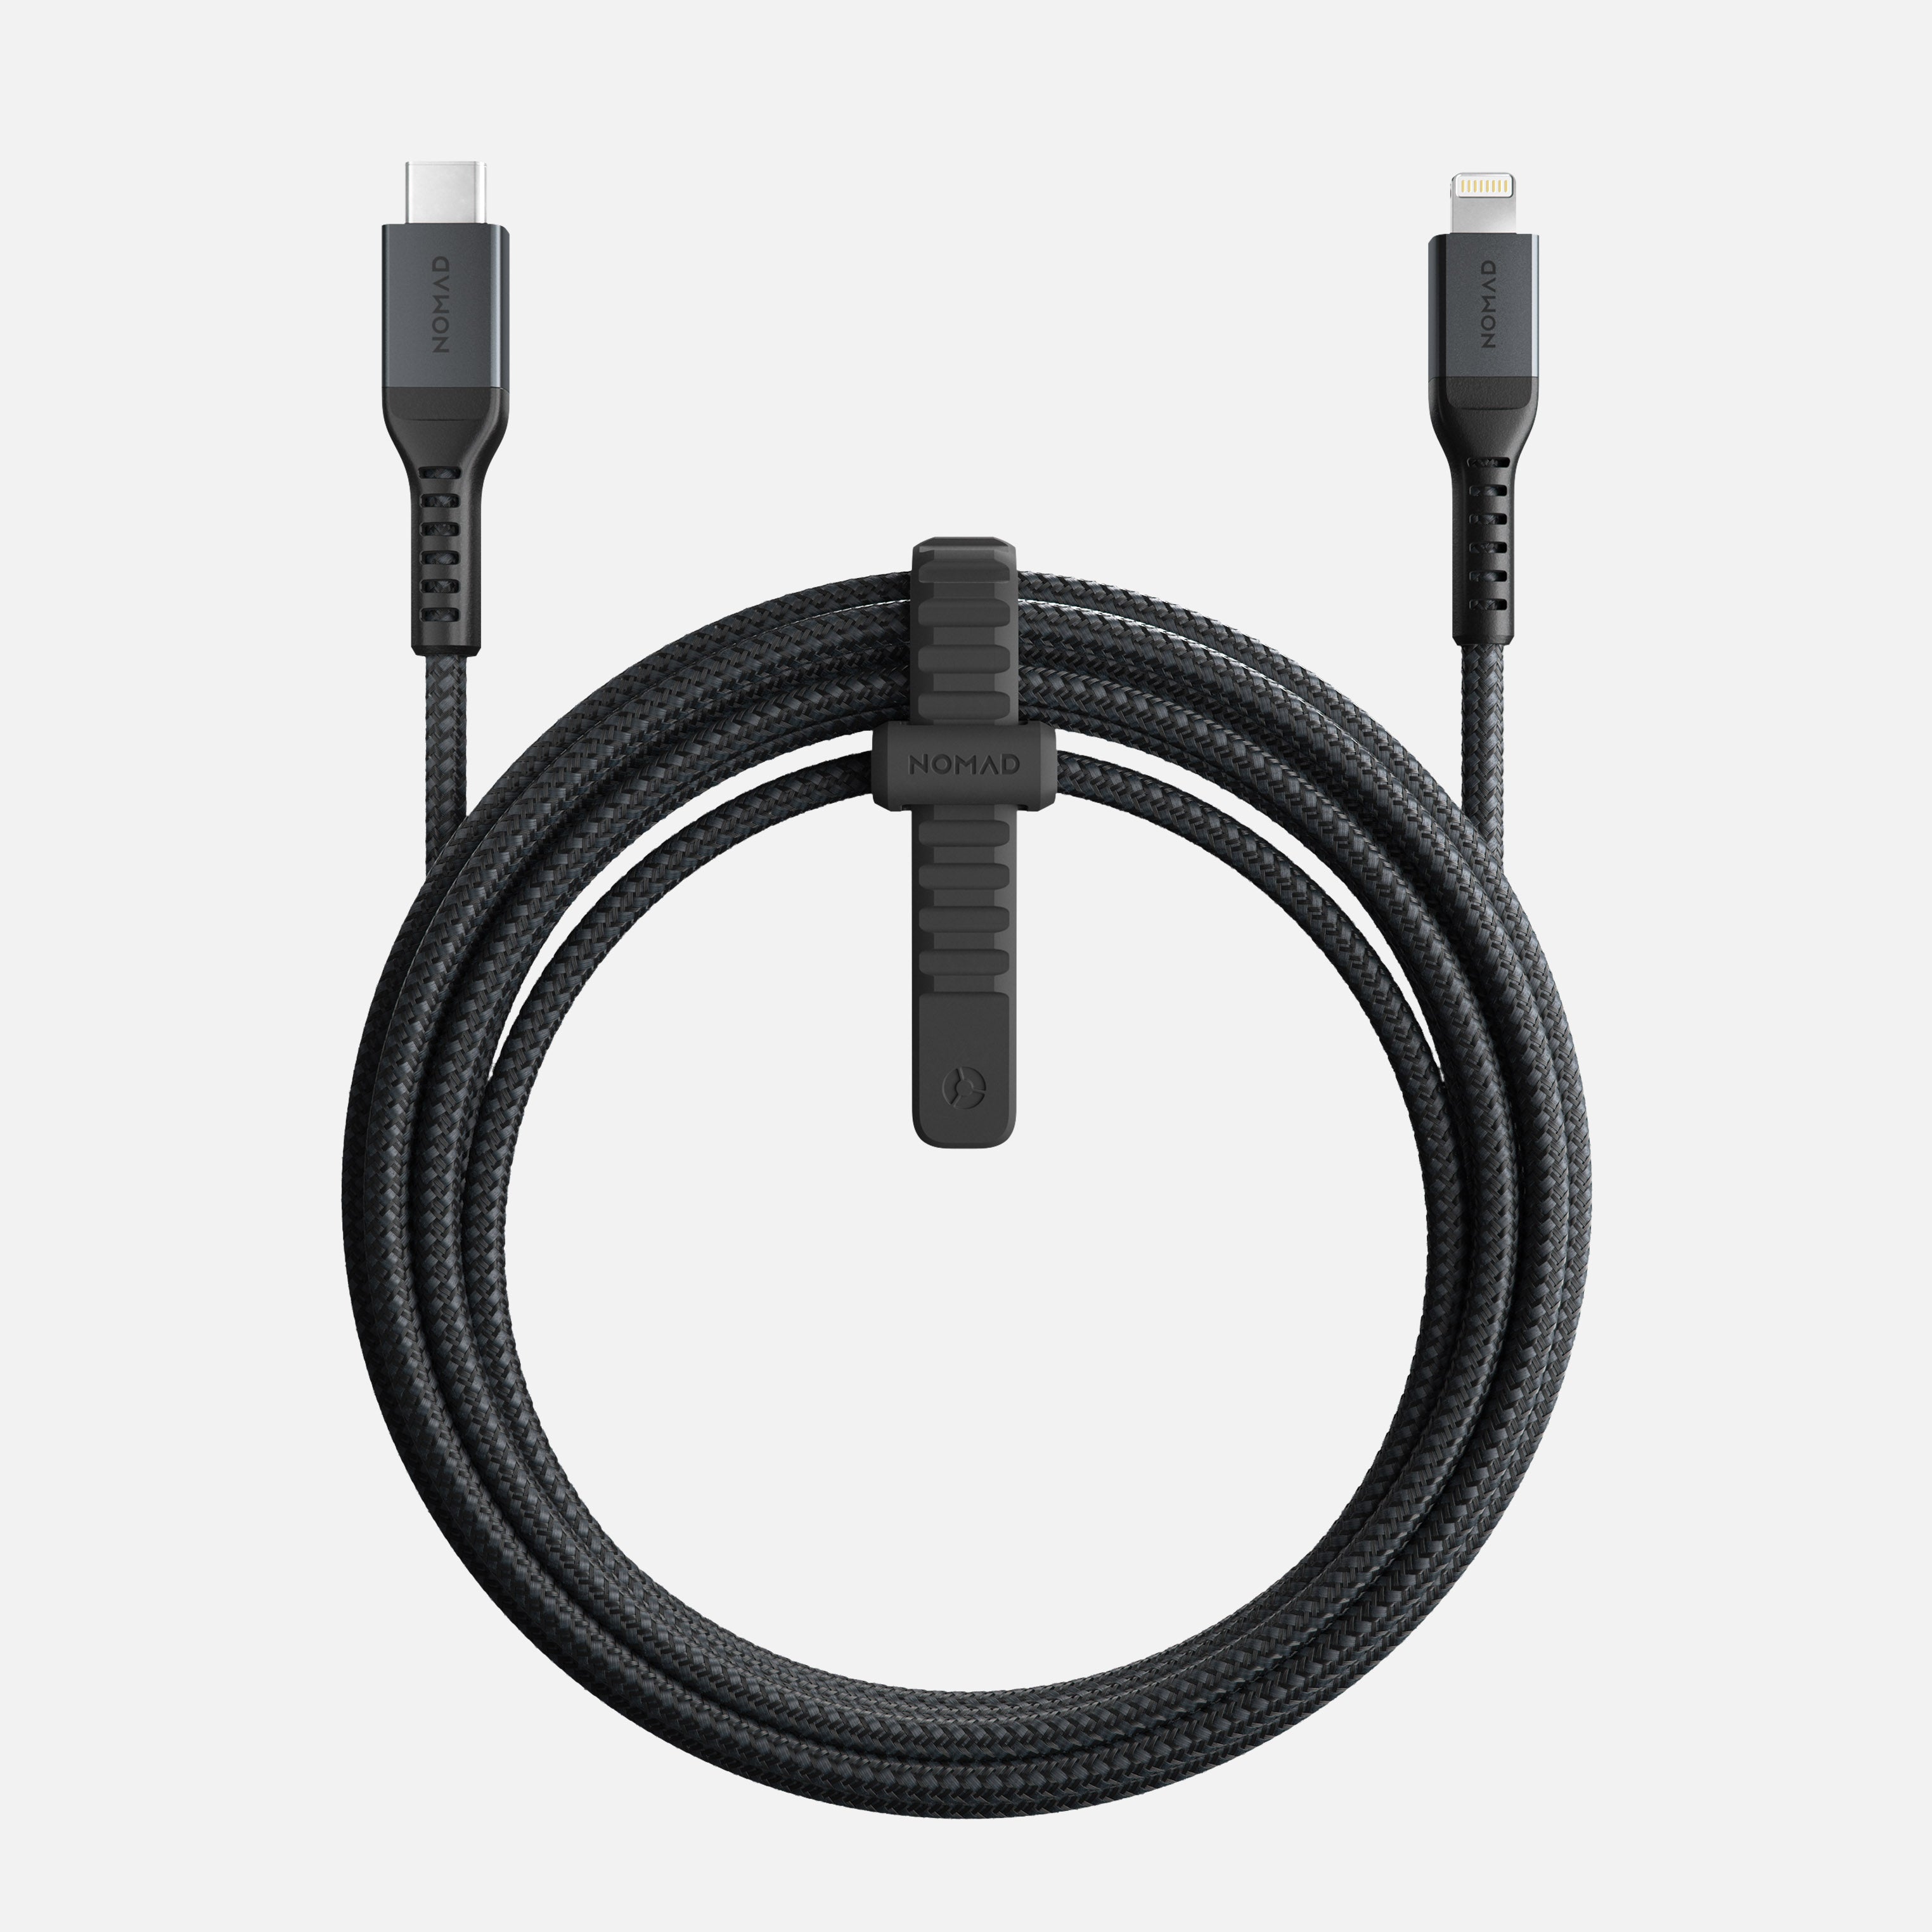 Apple Lightning to USB Cable (3-Foot): Consistent Charging for